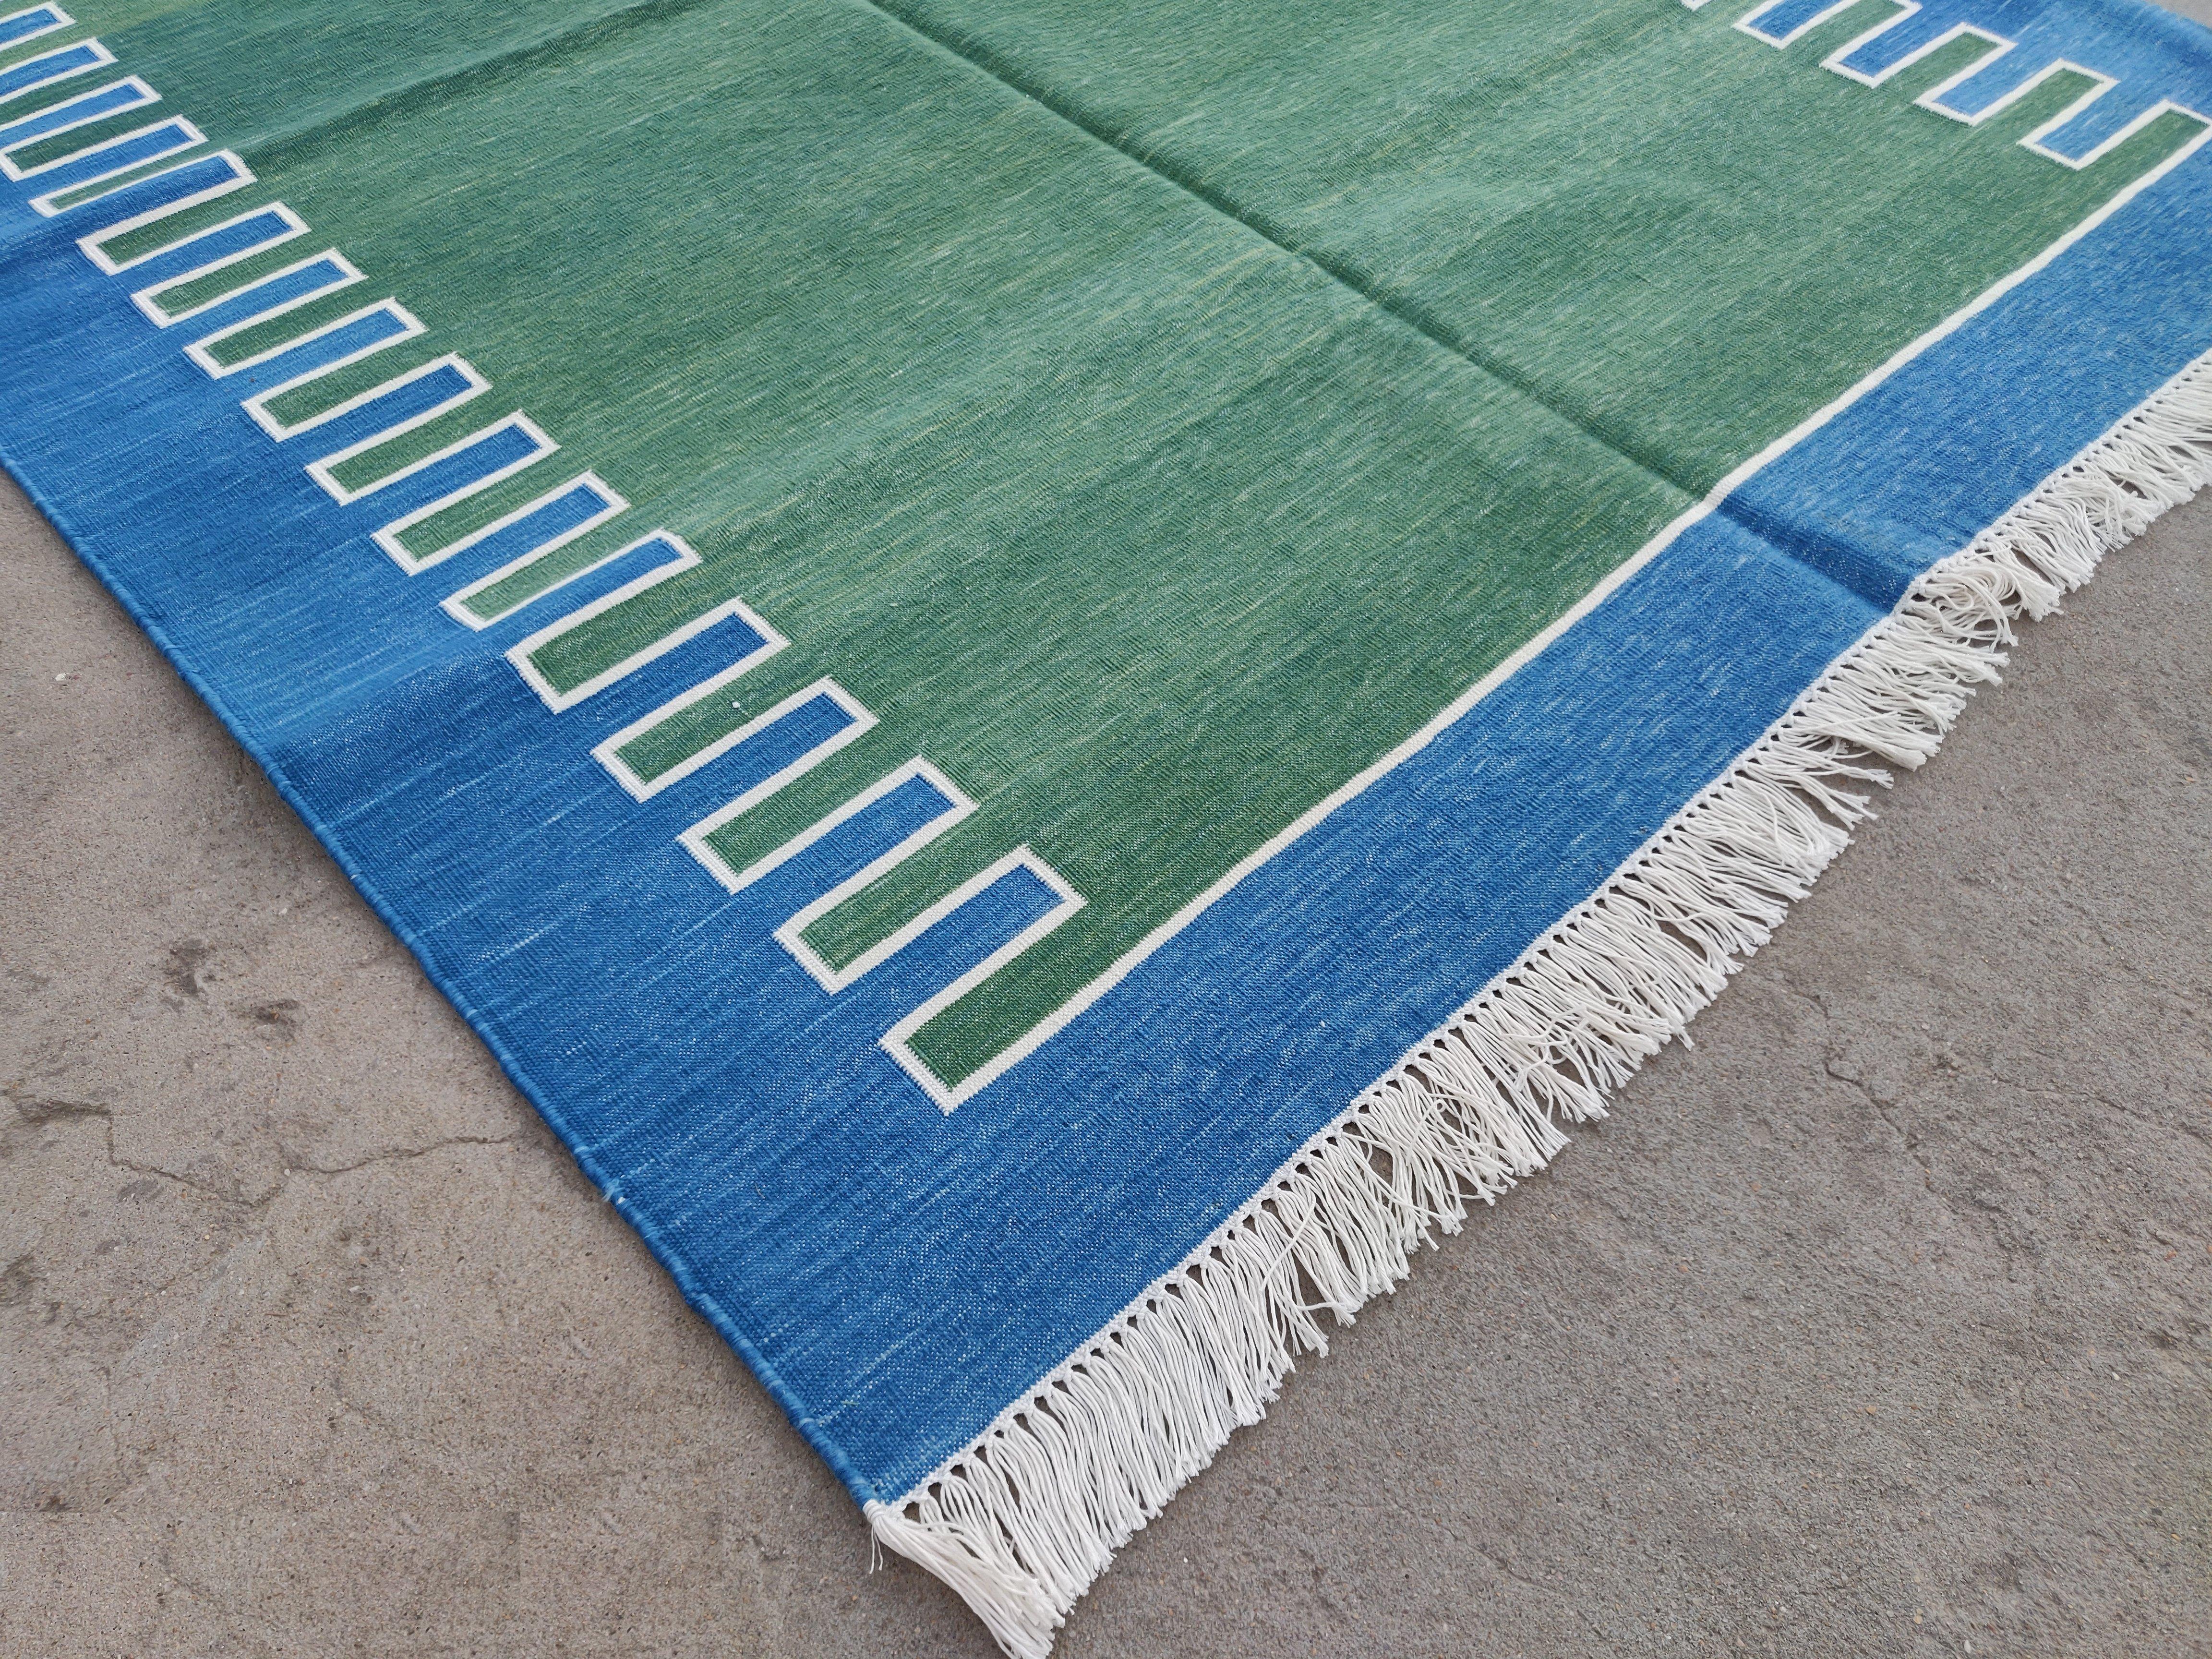 Hand-Woven Handmade Cotton Area Flat Weave Rug, 4x6 Green And Blue Striped Indian Dhurrie For Sale